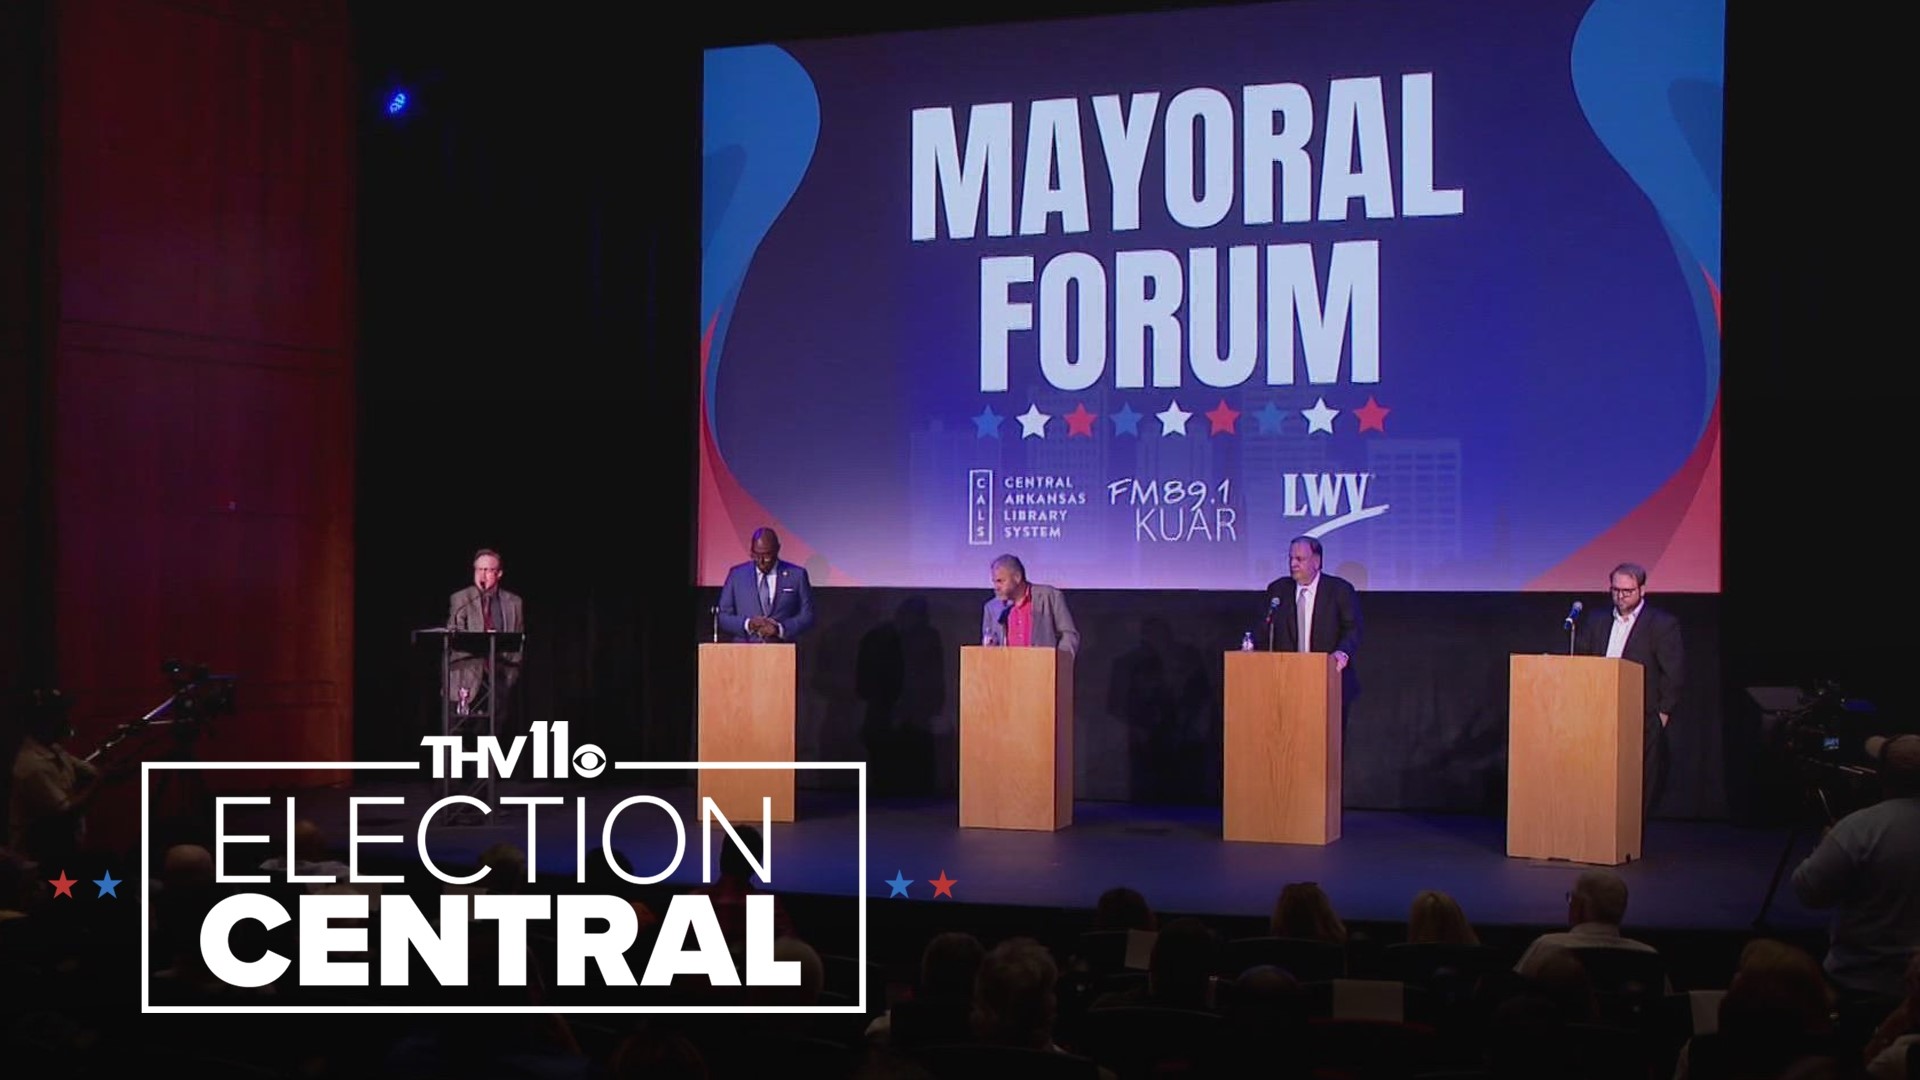 We're just two weeks away from early voting, and one of the hottest races is for Little Rock mayor. The city held a mayoral forum on Monday night that got heated.